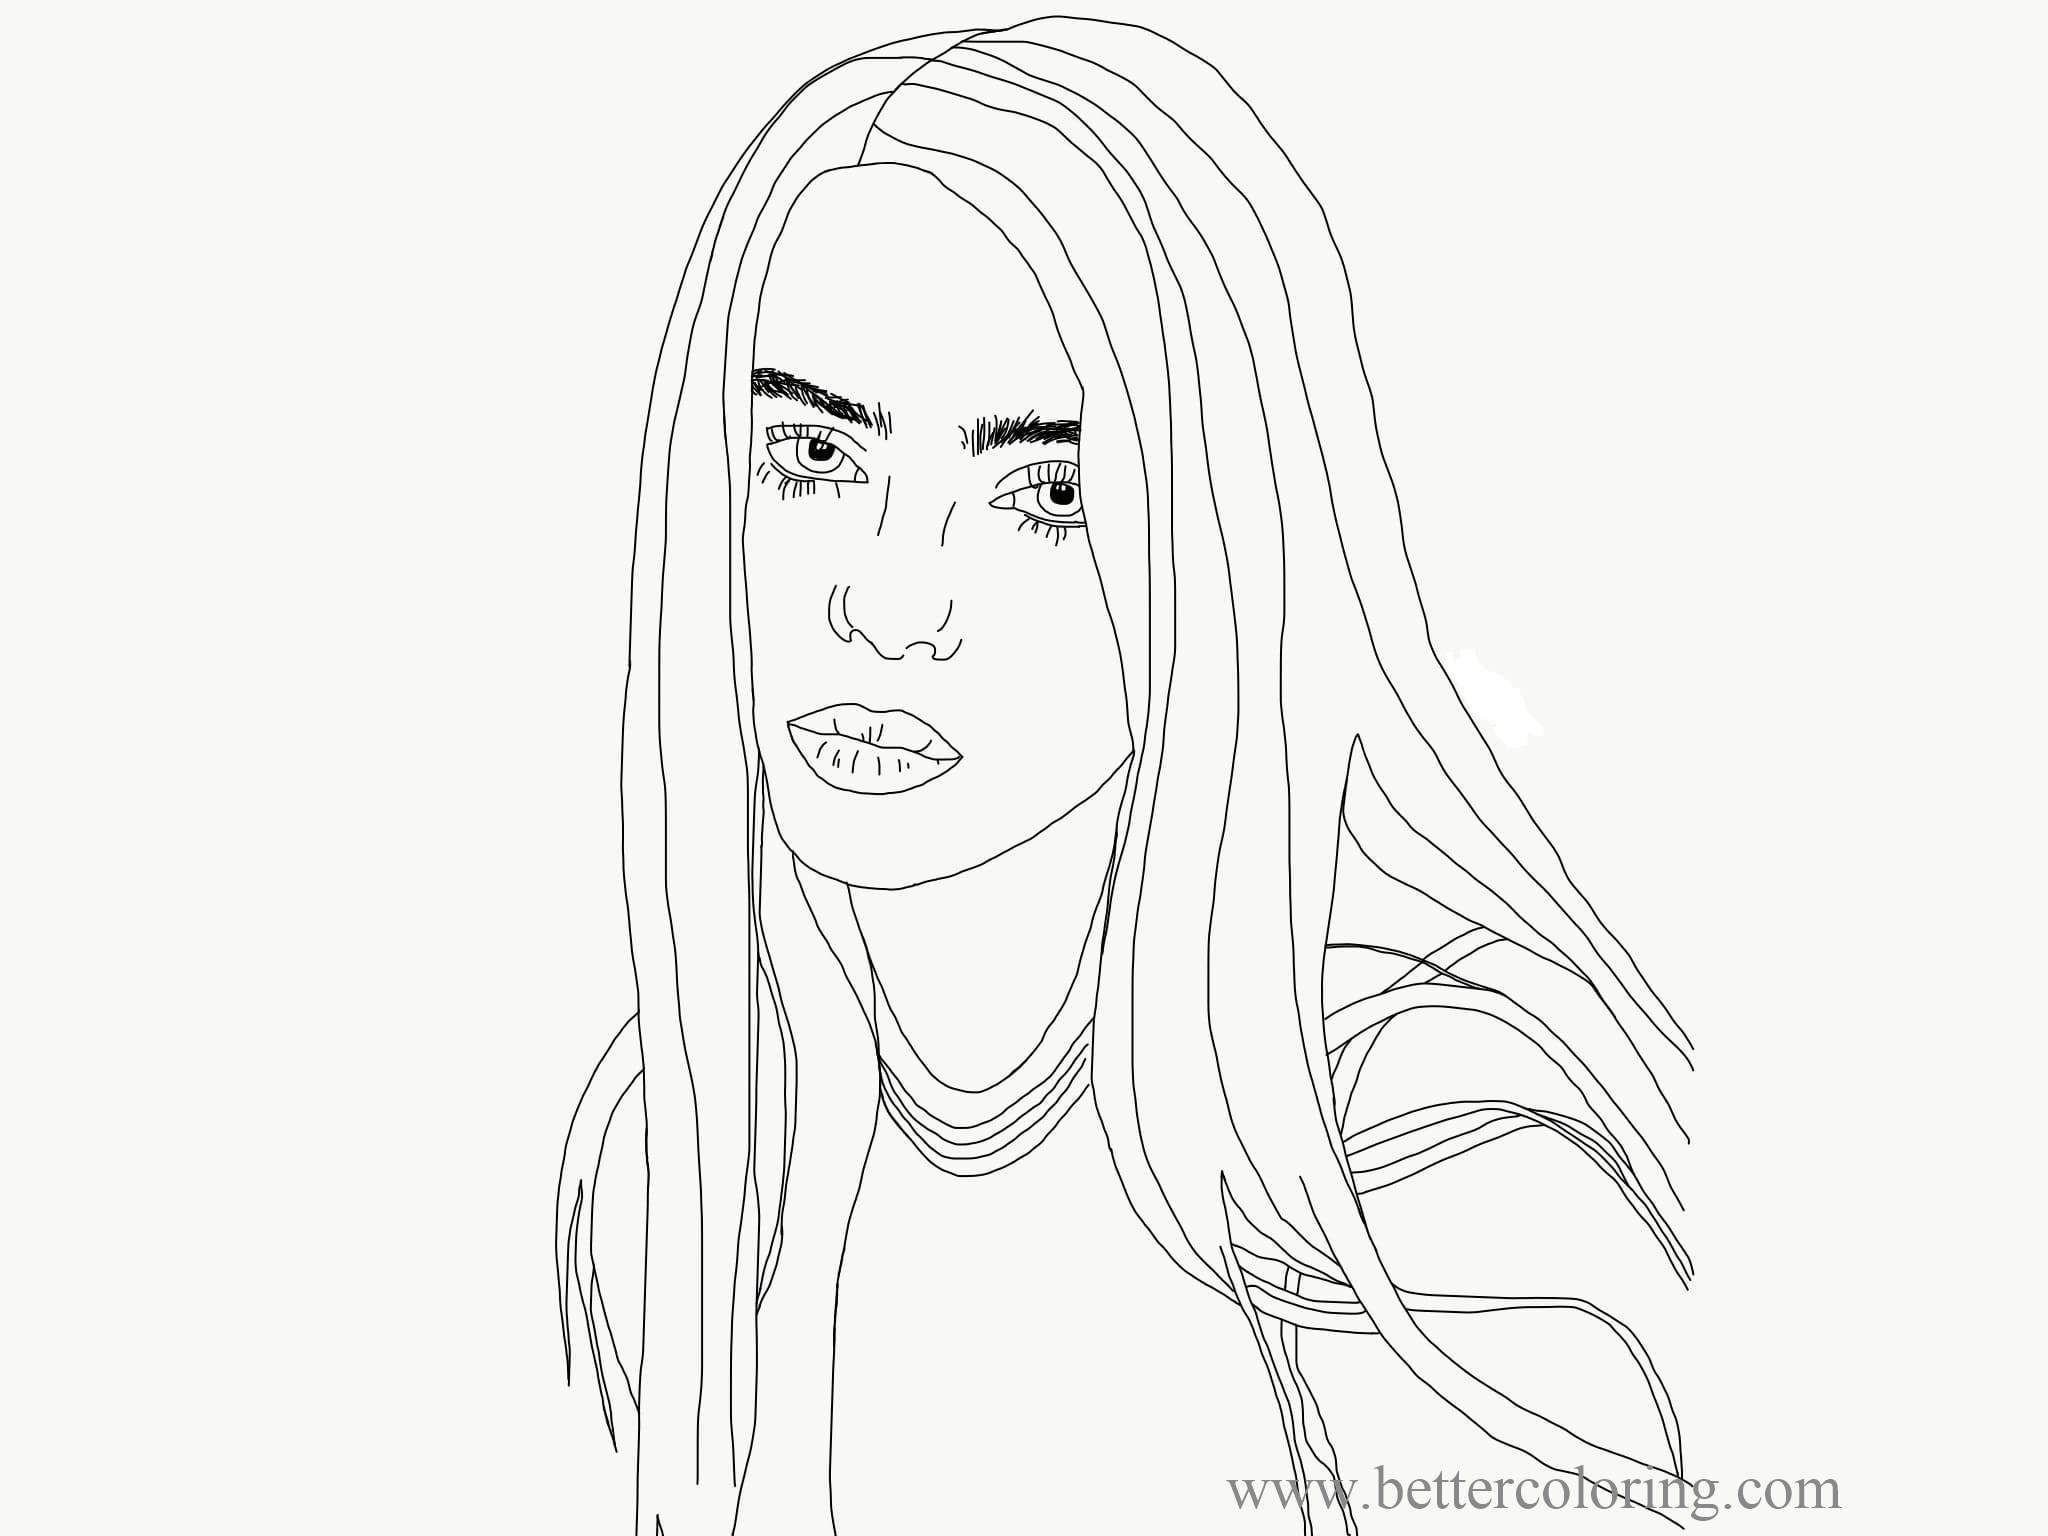 Free Pencil Drawing Billie Eilish Coloring Pages printable